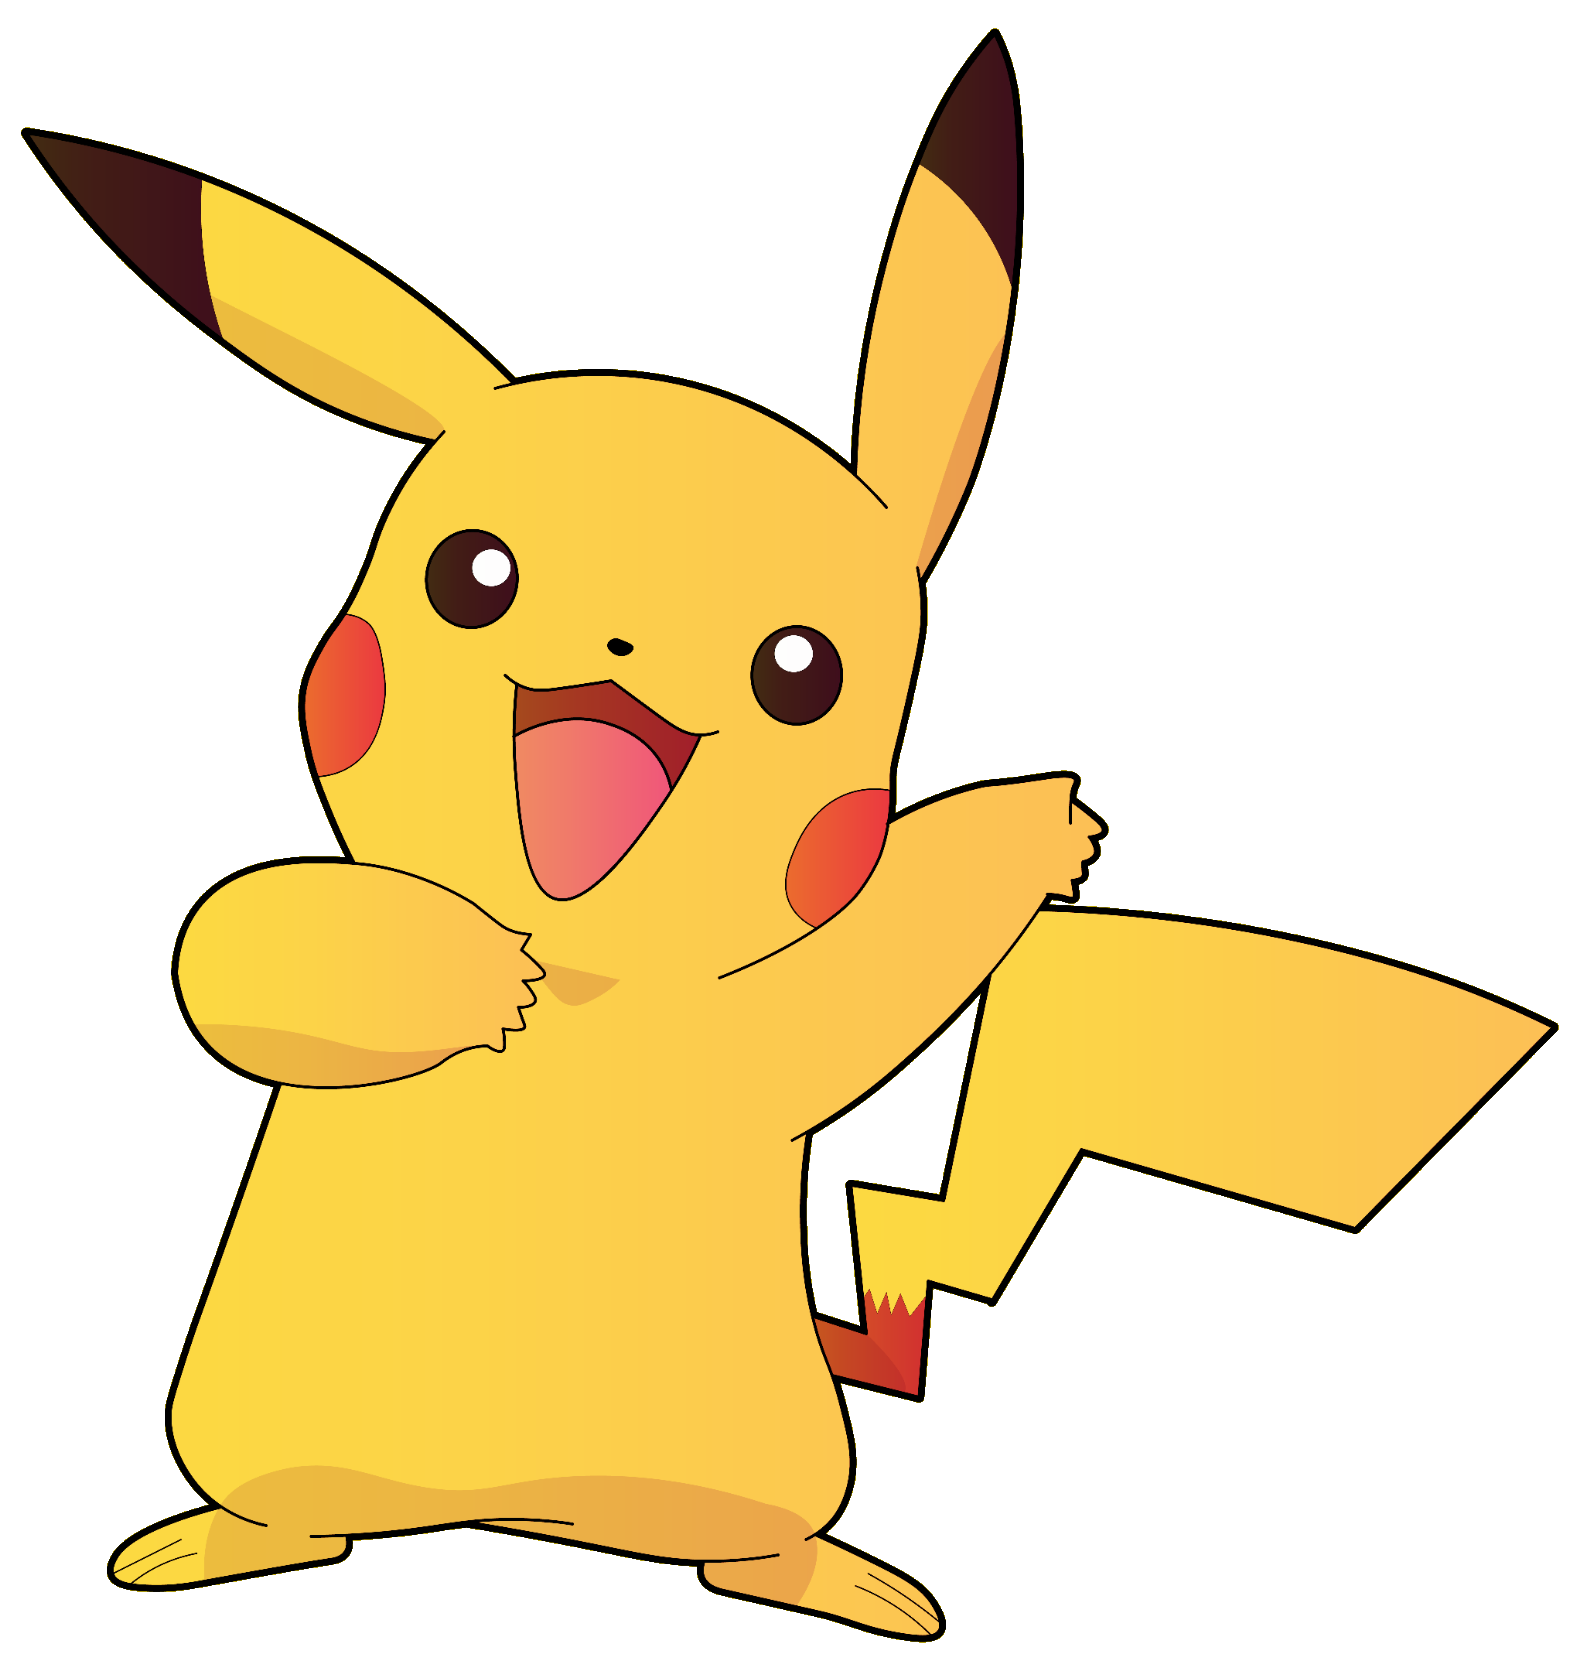 Pokemon PNG Images Free Download - Pngfre